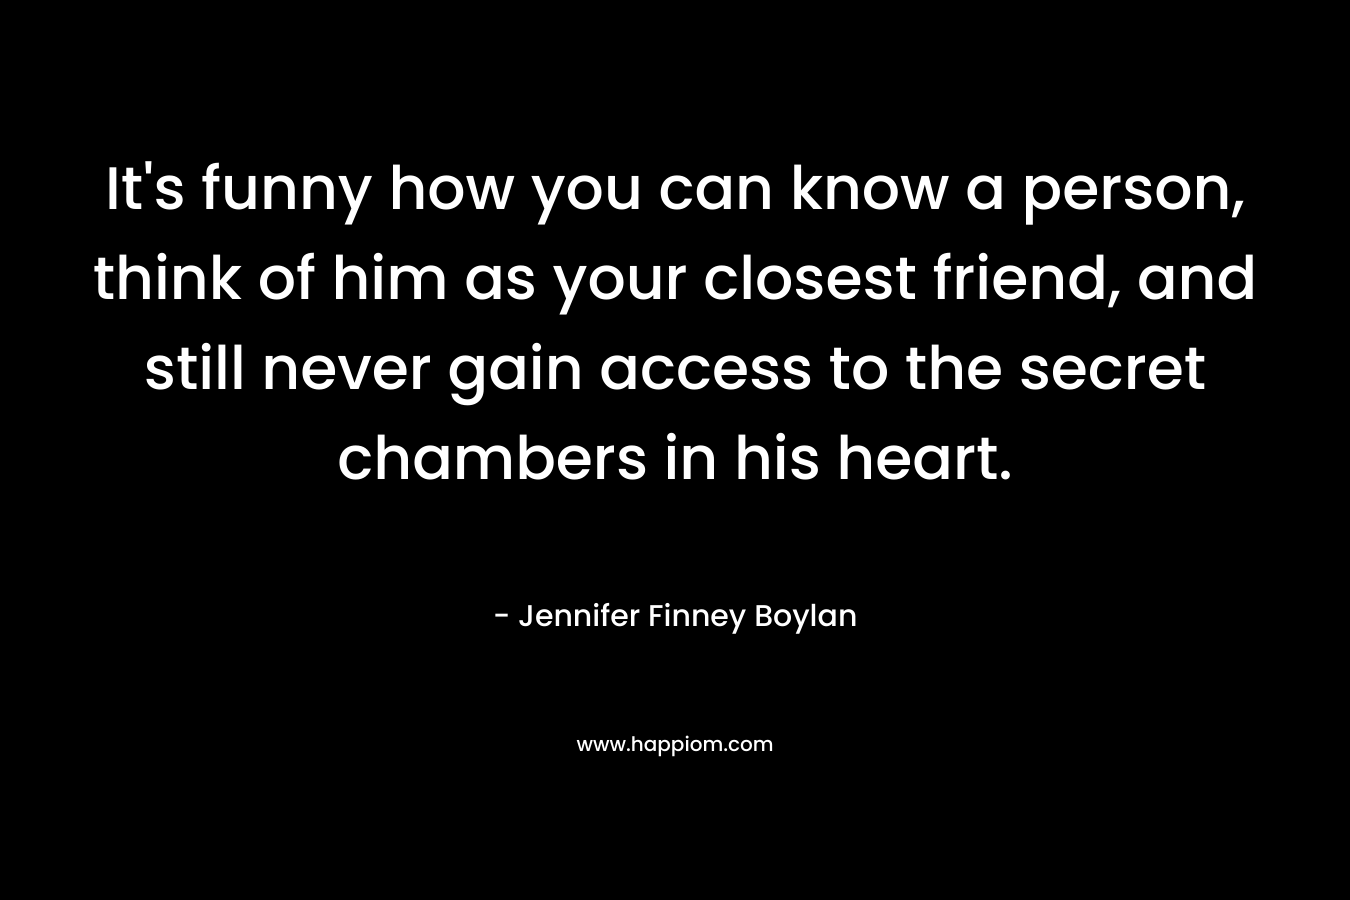 It’s funny how you can know a person, think of him as your closest friend, and still never gain access to the secret chambers in his heart. – Jennifer Finney Boylan